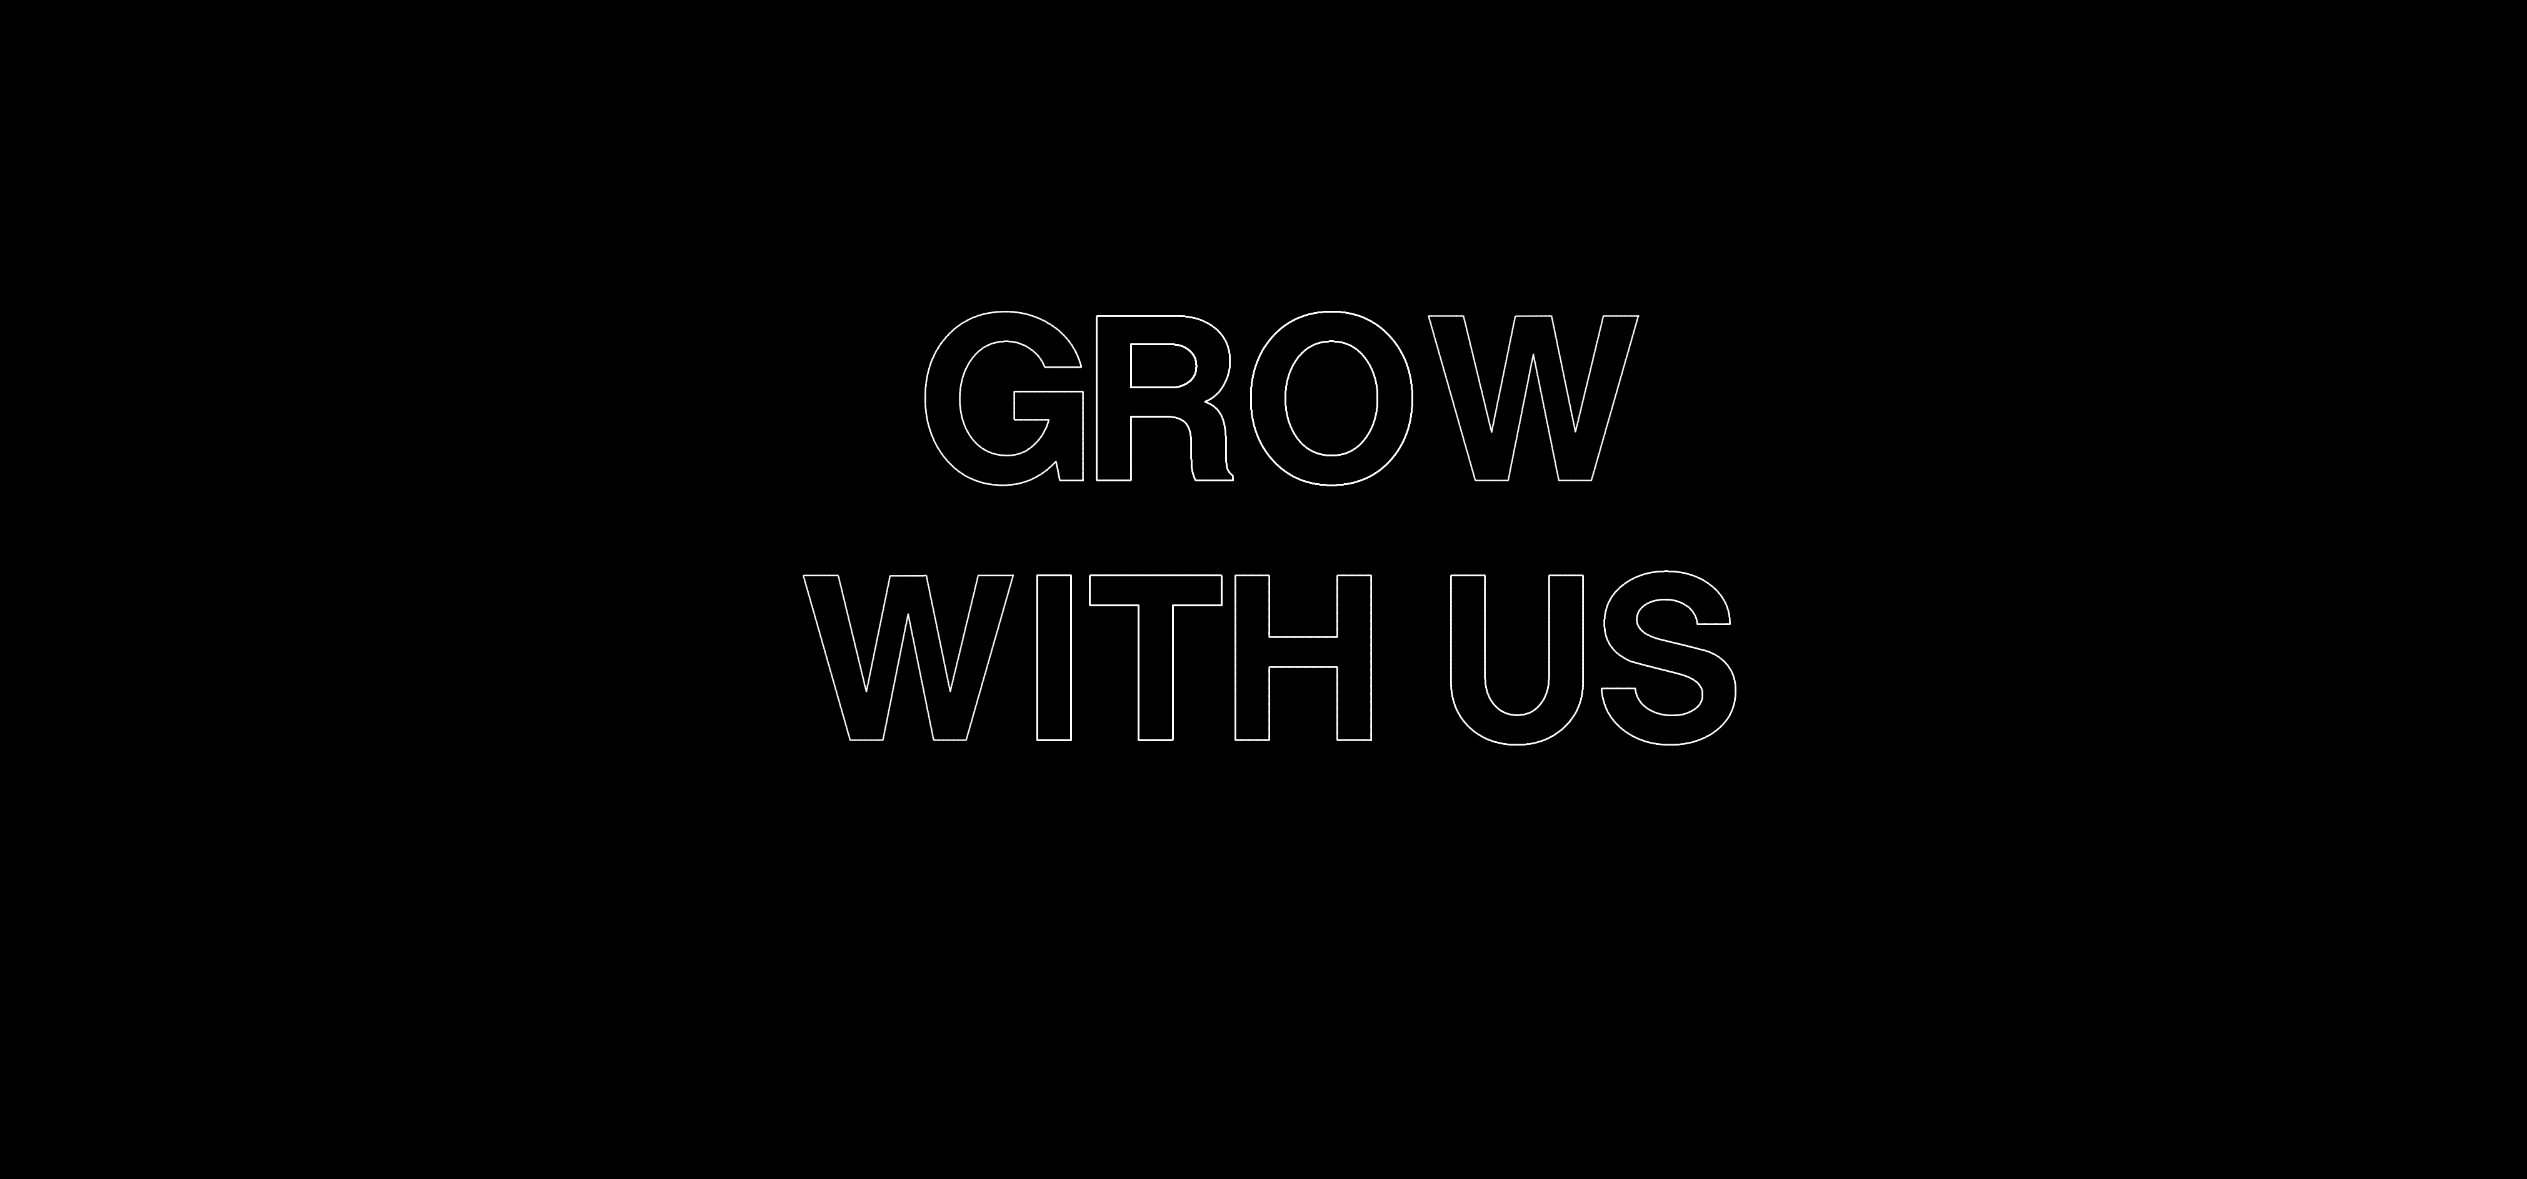 Grow with us banner image